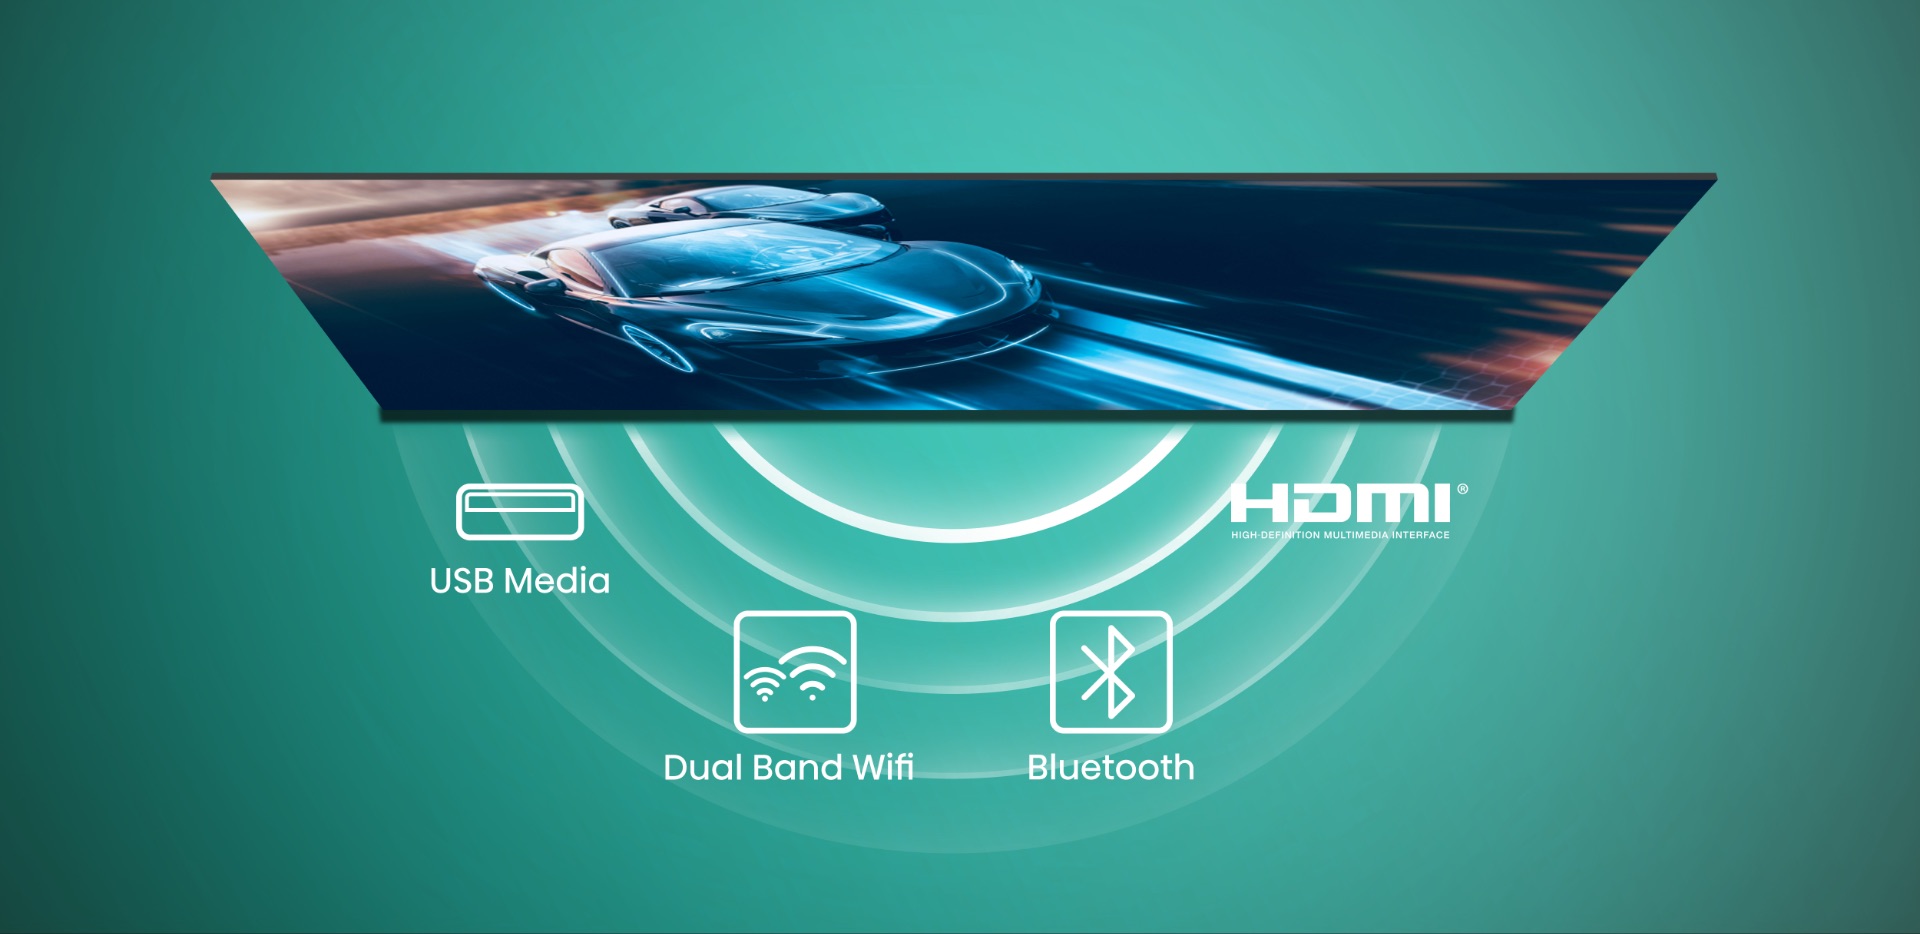 Image showcasing the versatile connectivity options on the Hisense A4G Series Smart FHD TV, including HDMI ports, USB slots, Wi-Fi, and Bluetooth, enabling seamless integration with external devices.